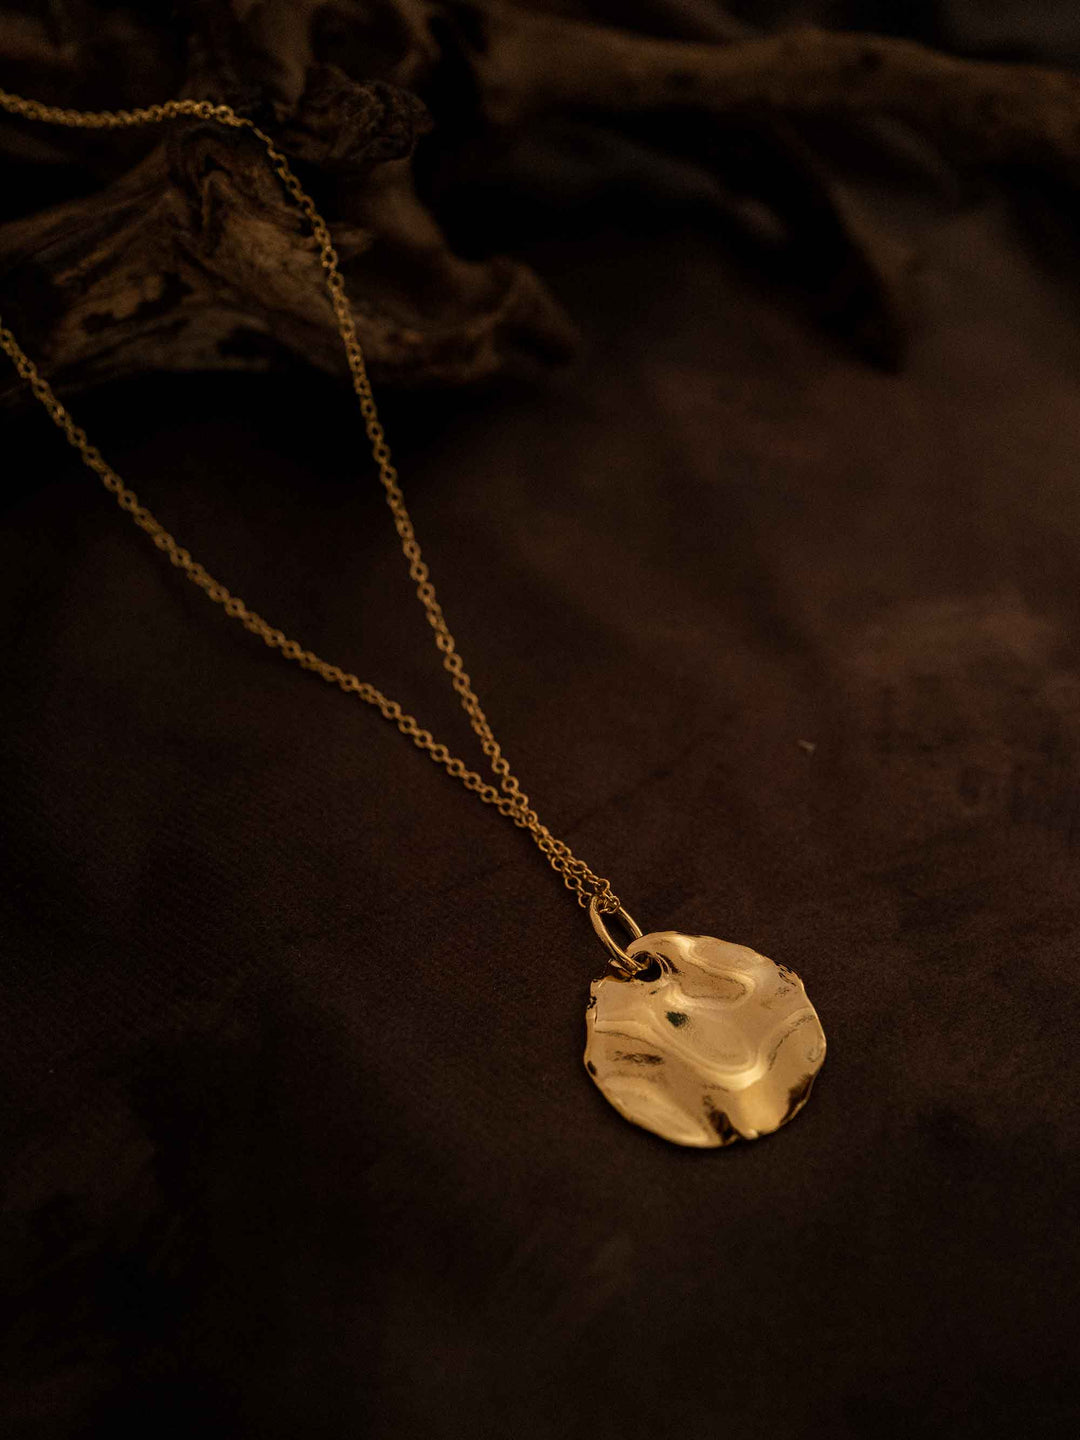 A gold necklace with a round pendant